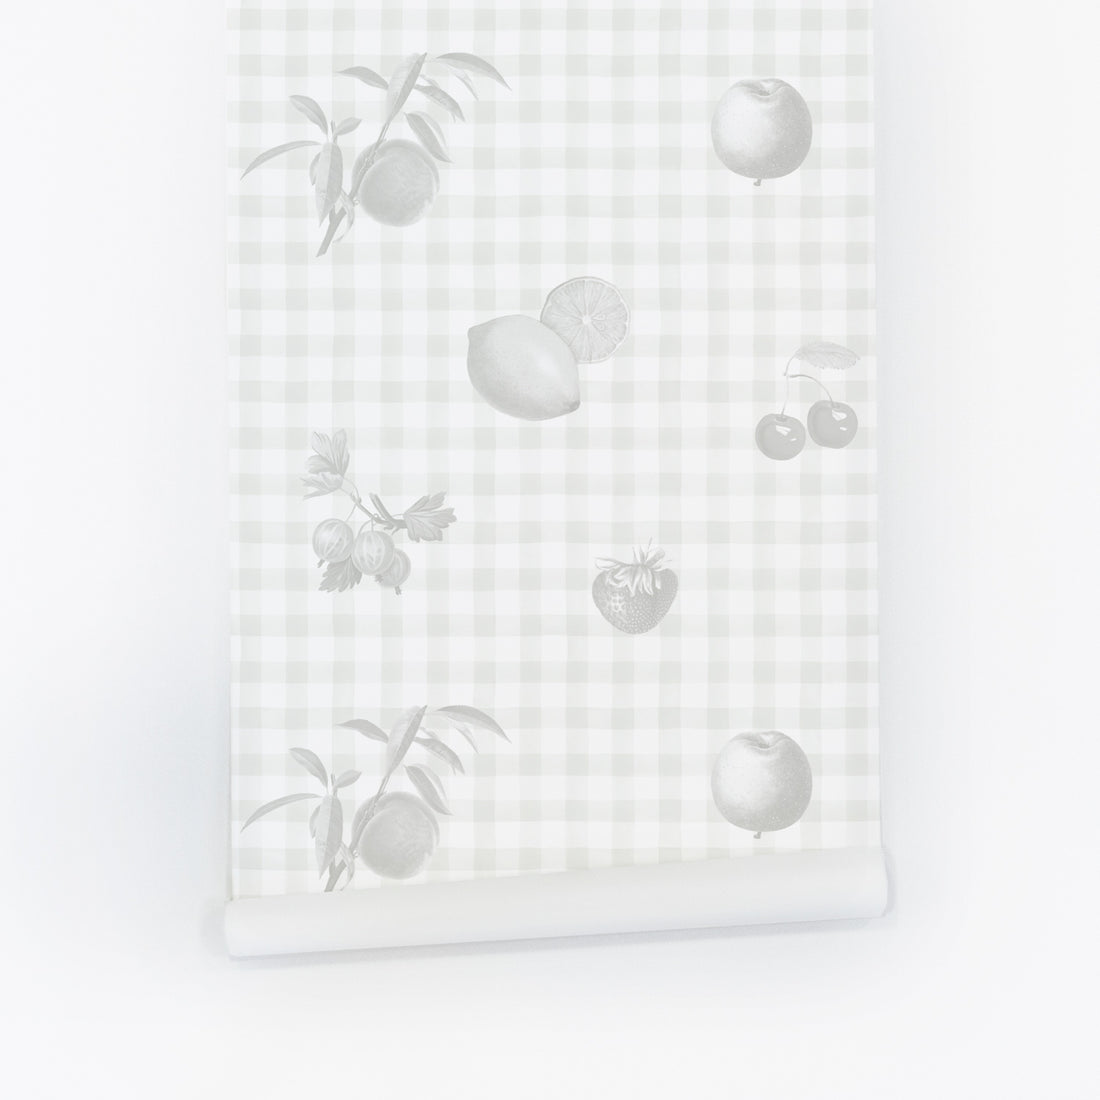 printed fruits on gingham pattern wallpaper peel and stick